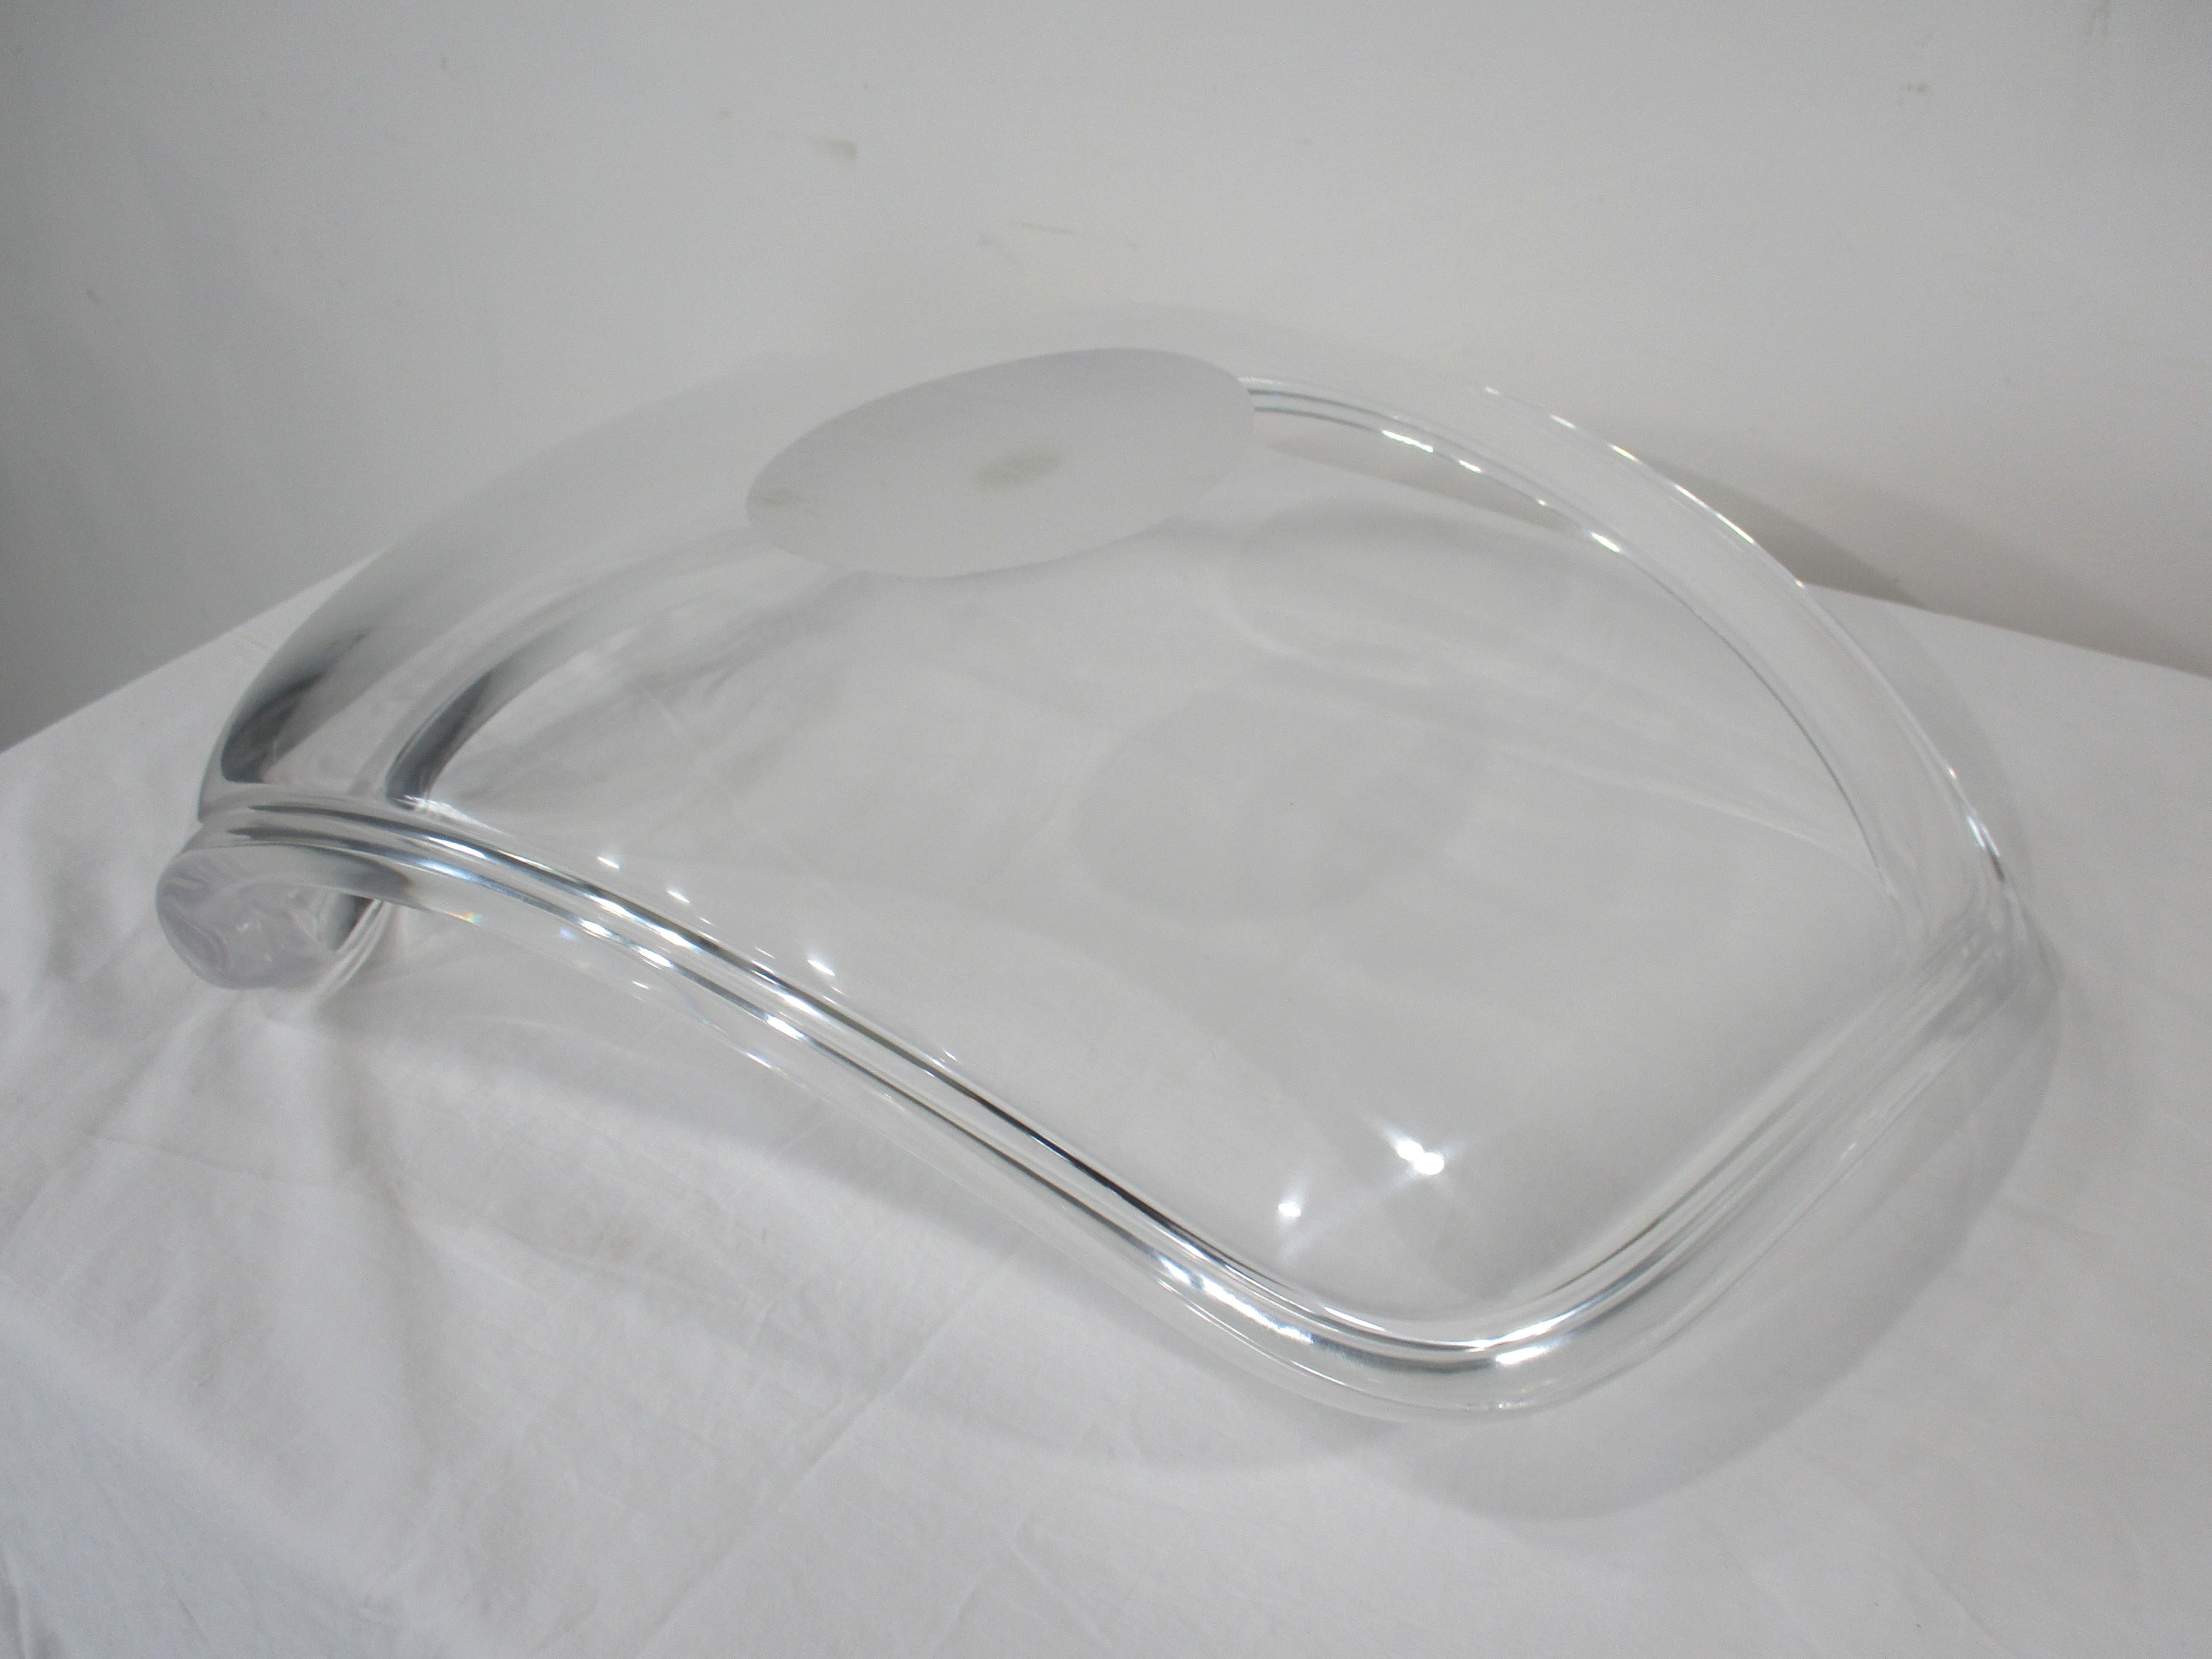 Herb Ritts Large Mid Century Sculptural Lucite Center Piece Bowl for Astrolite For Sale 1